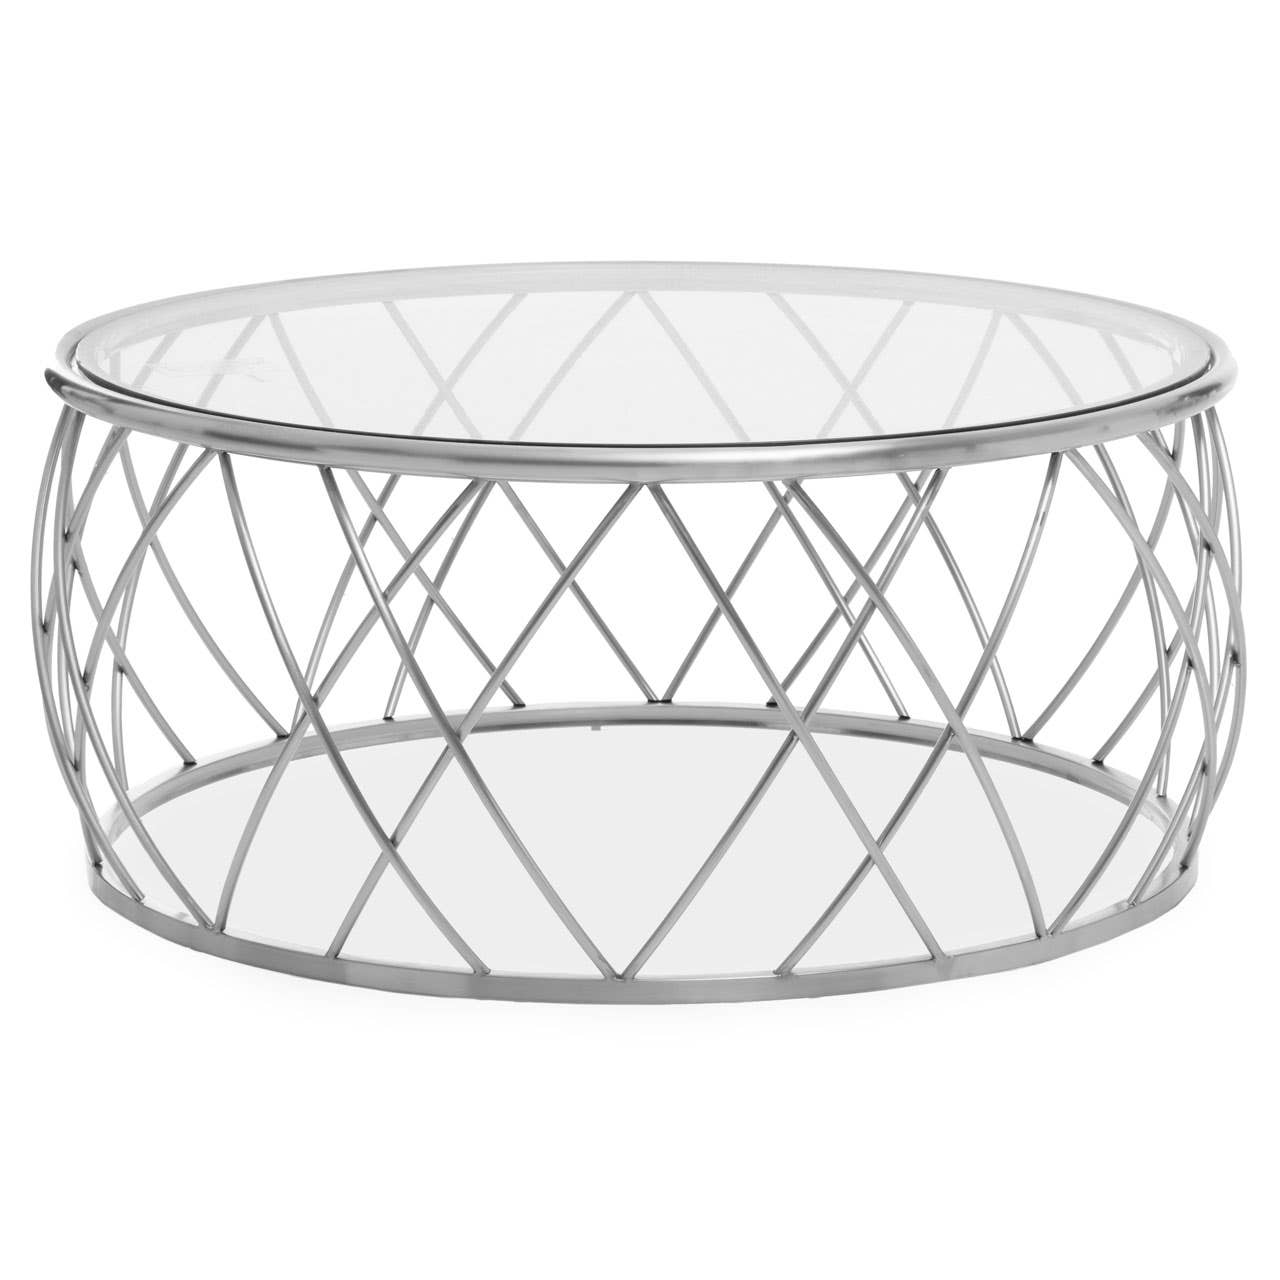 Ackley Clear Glass And Silver Frame Round Coffee Table.